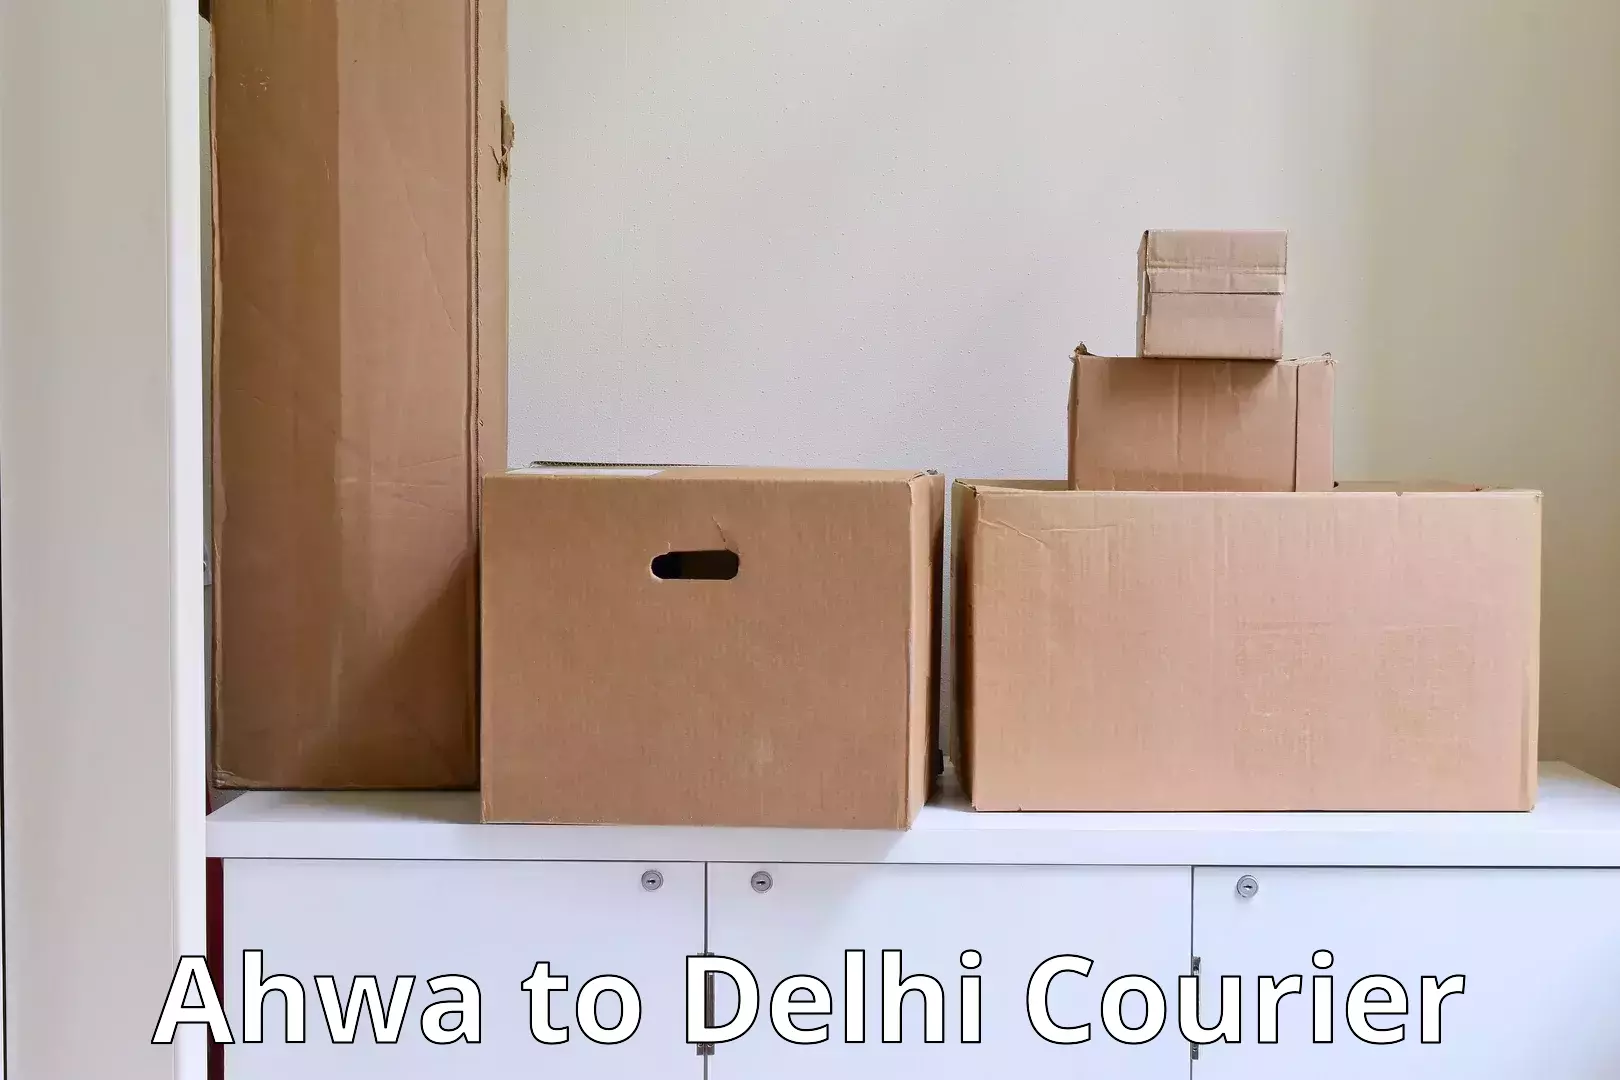 Trusted moving company Ahwa to University of Delhi